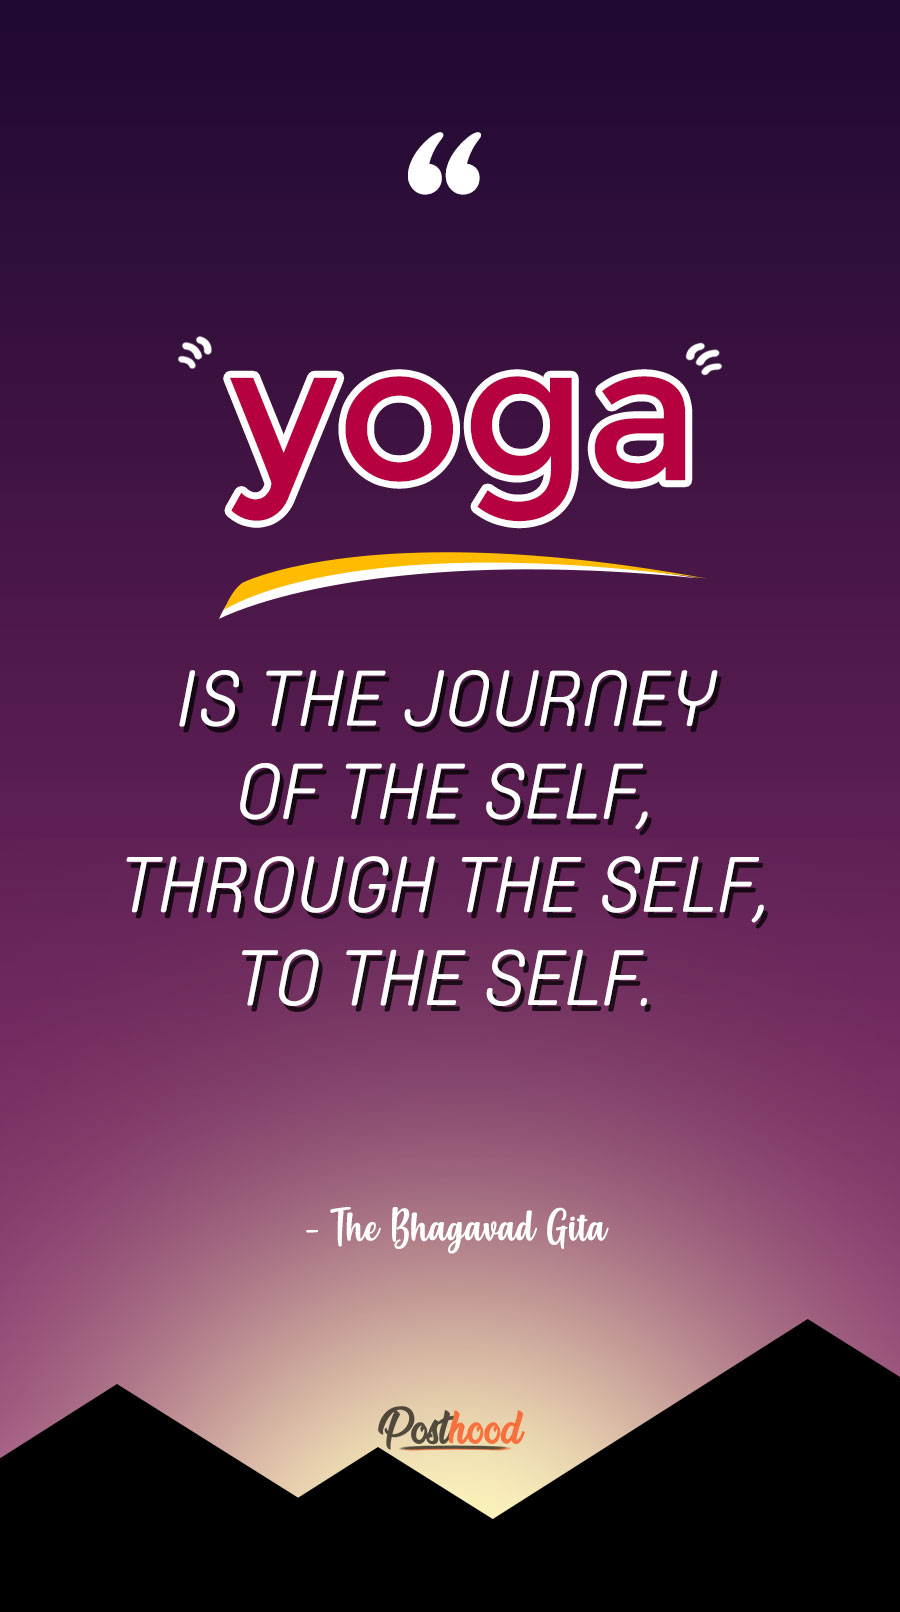 “Yoga is the journey of the self, through the self, to the self.” - THE BHAGAVAD GITA. Best Yoga Quotes Wallpaper